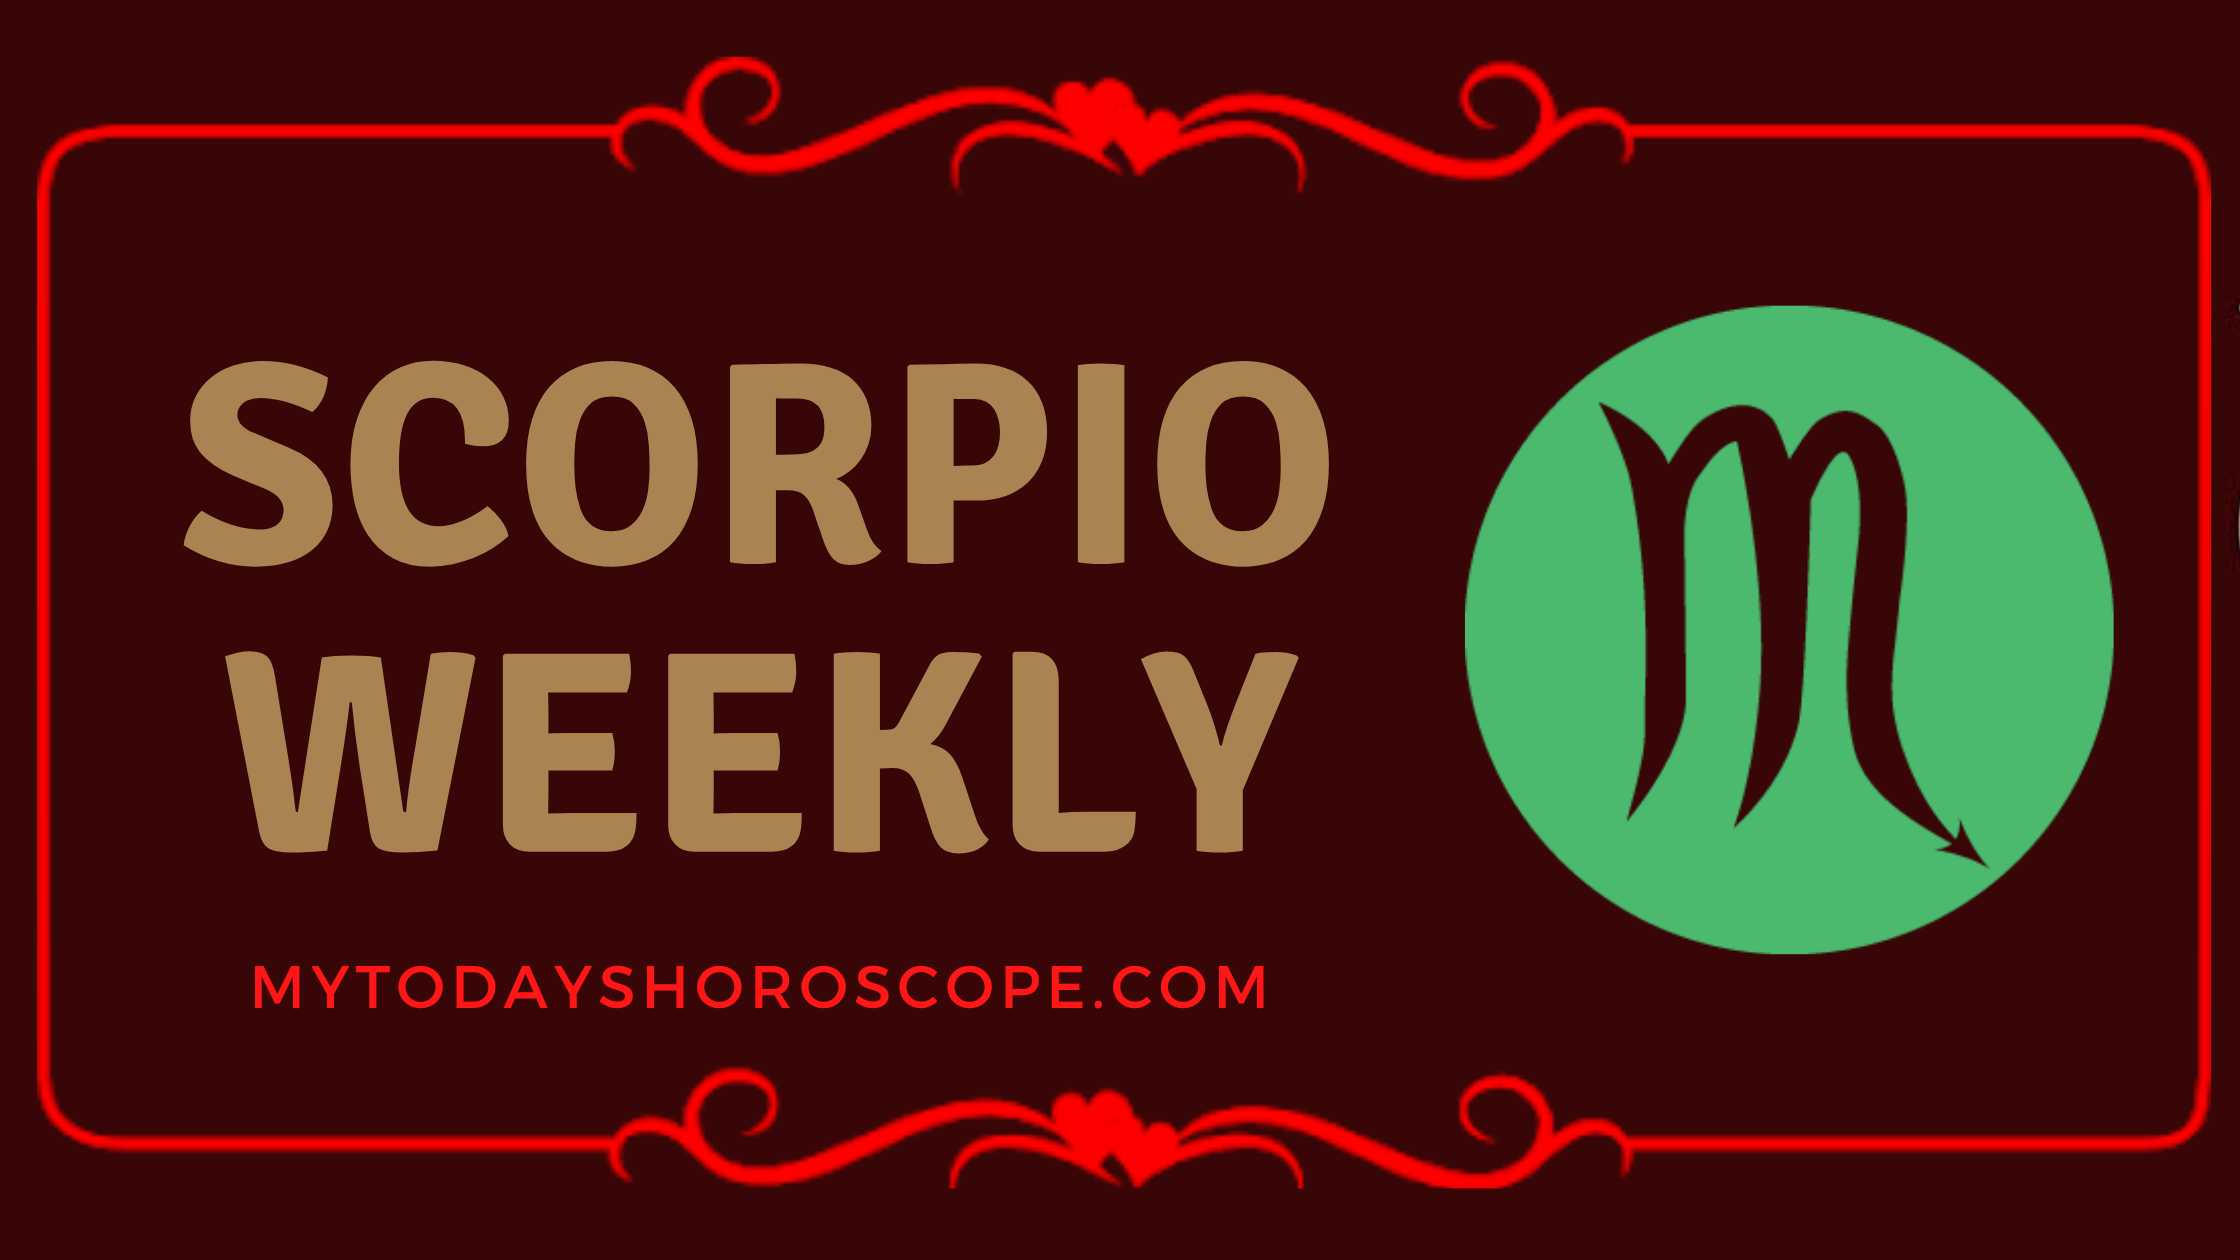 Scorpio Weekly Horoscope for Love, Work and Well-being